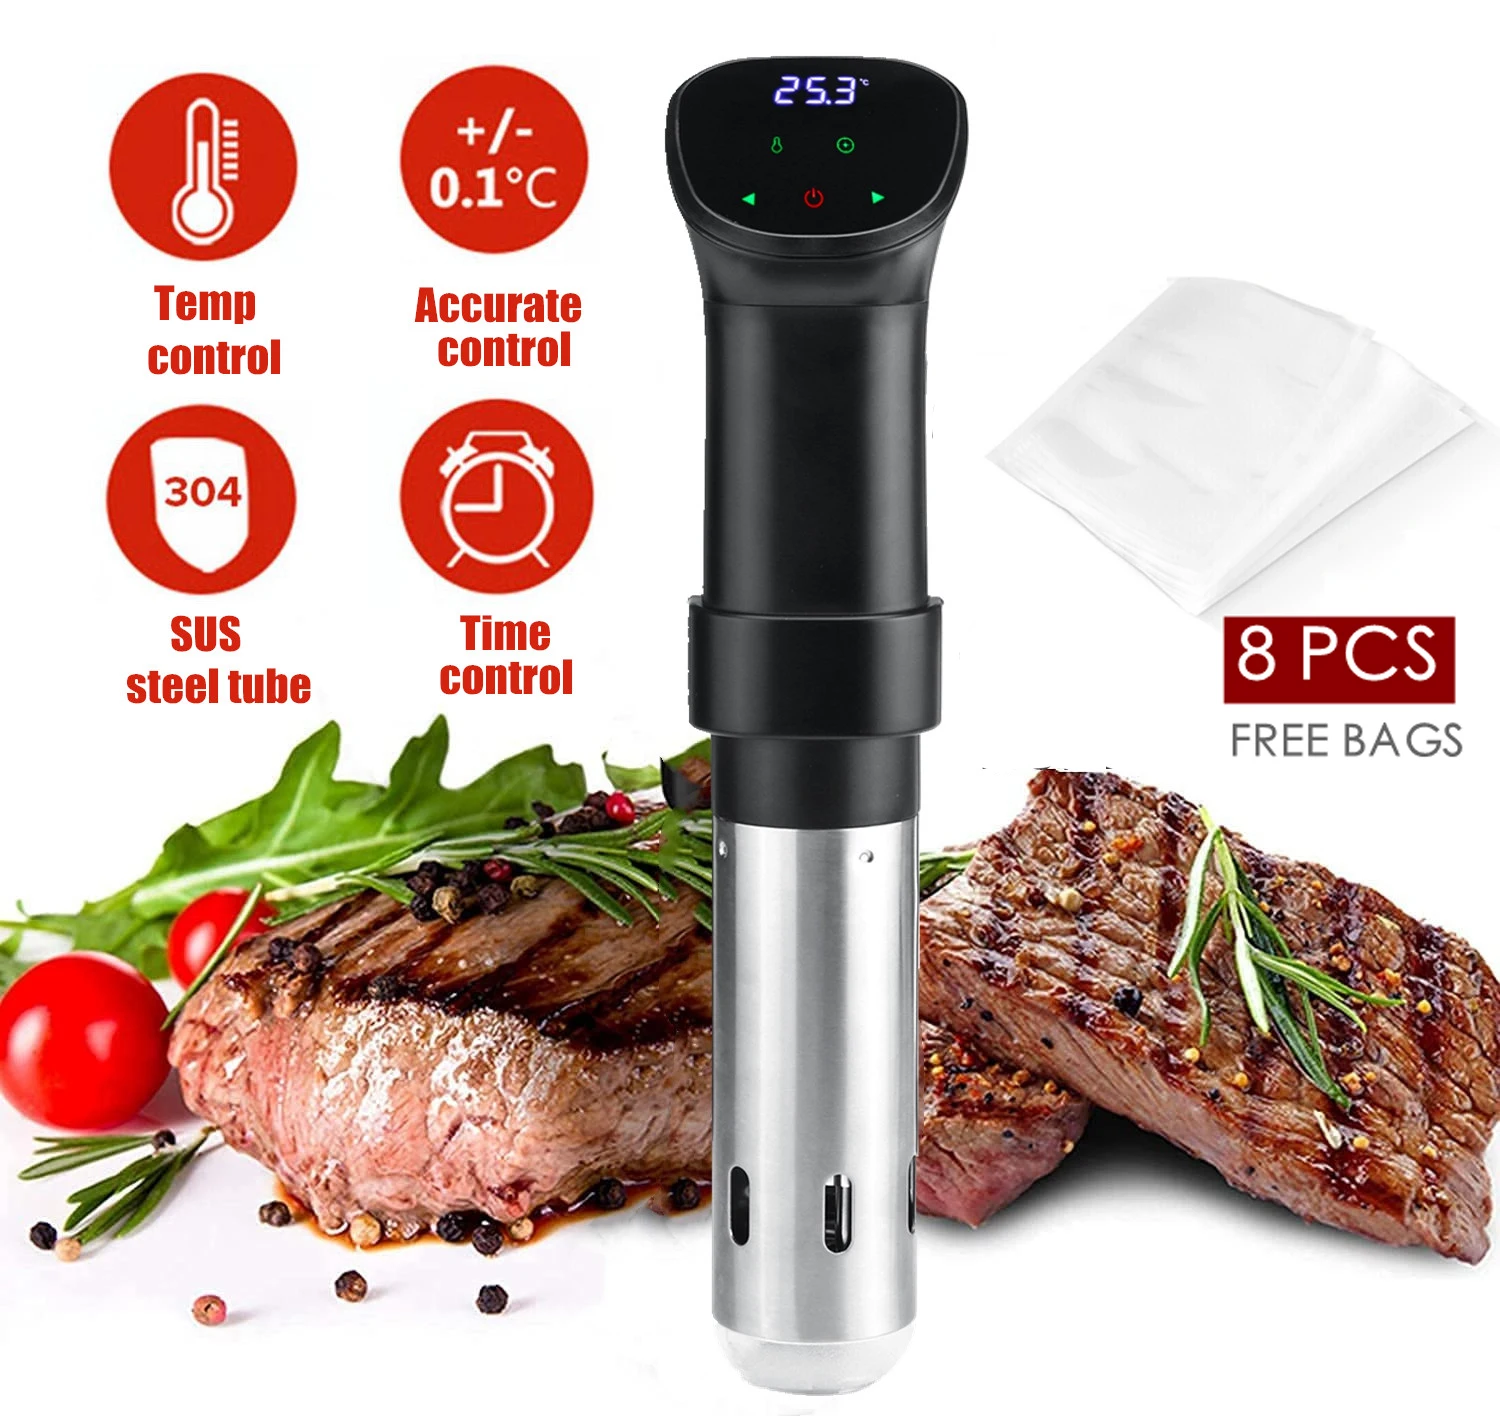 IPX7 Waterproof Powerful Vacuum Sous Vide Cooker 1800W Immersion Circulator Accurate Cooking LCD Digital Timer Cooking Machine